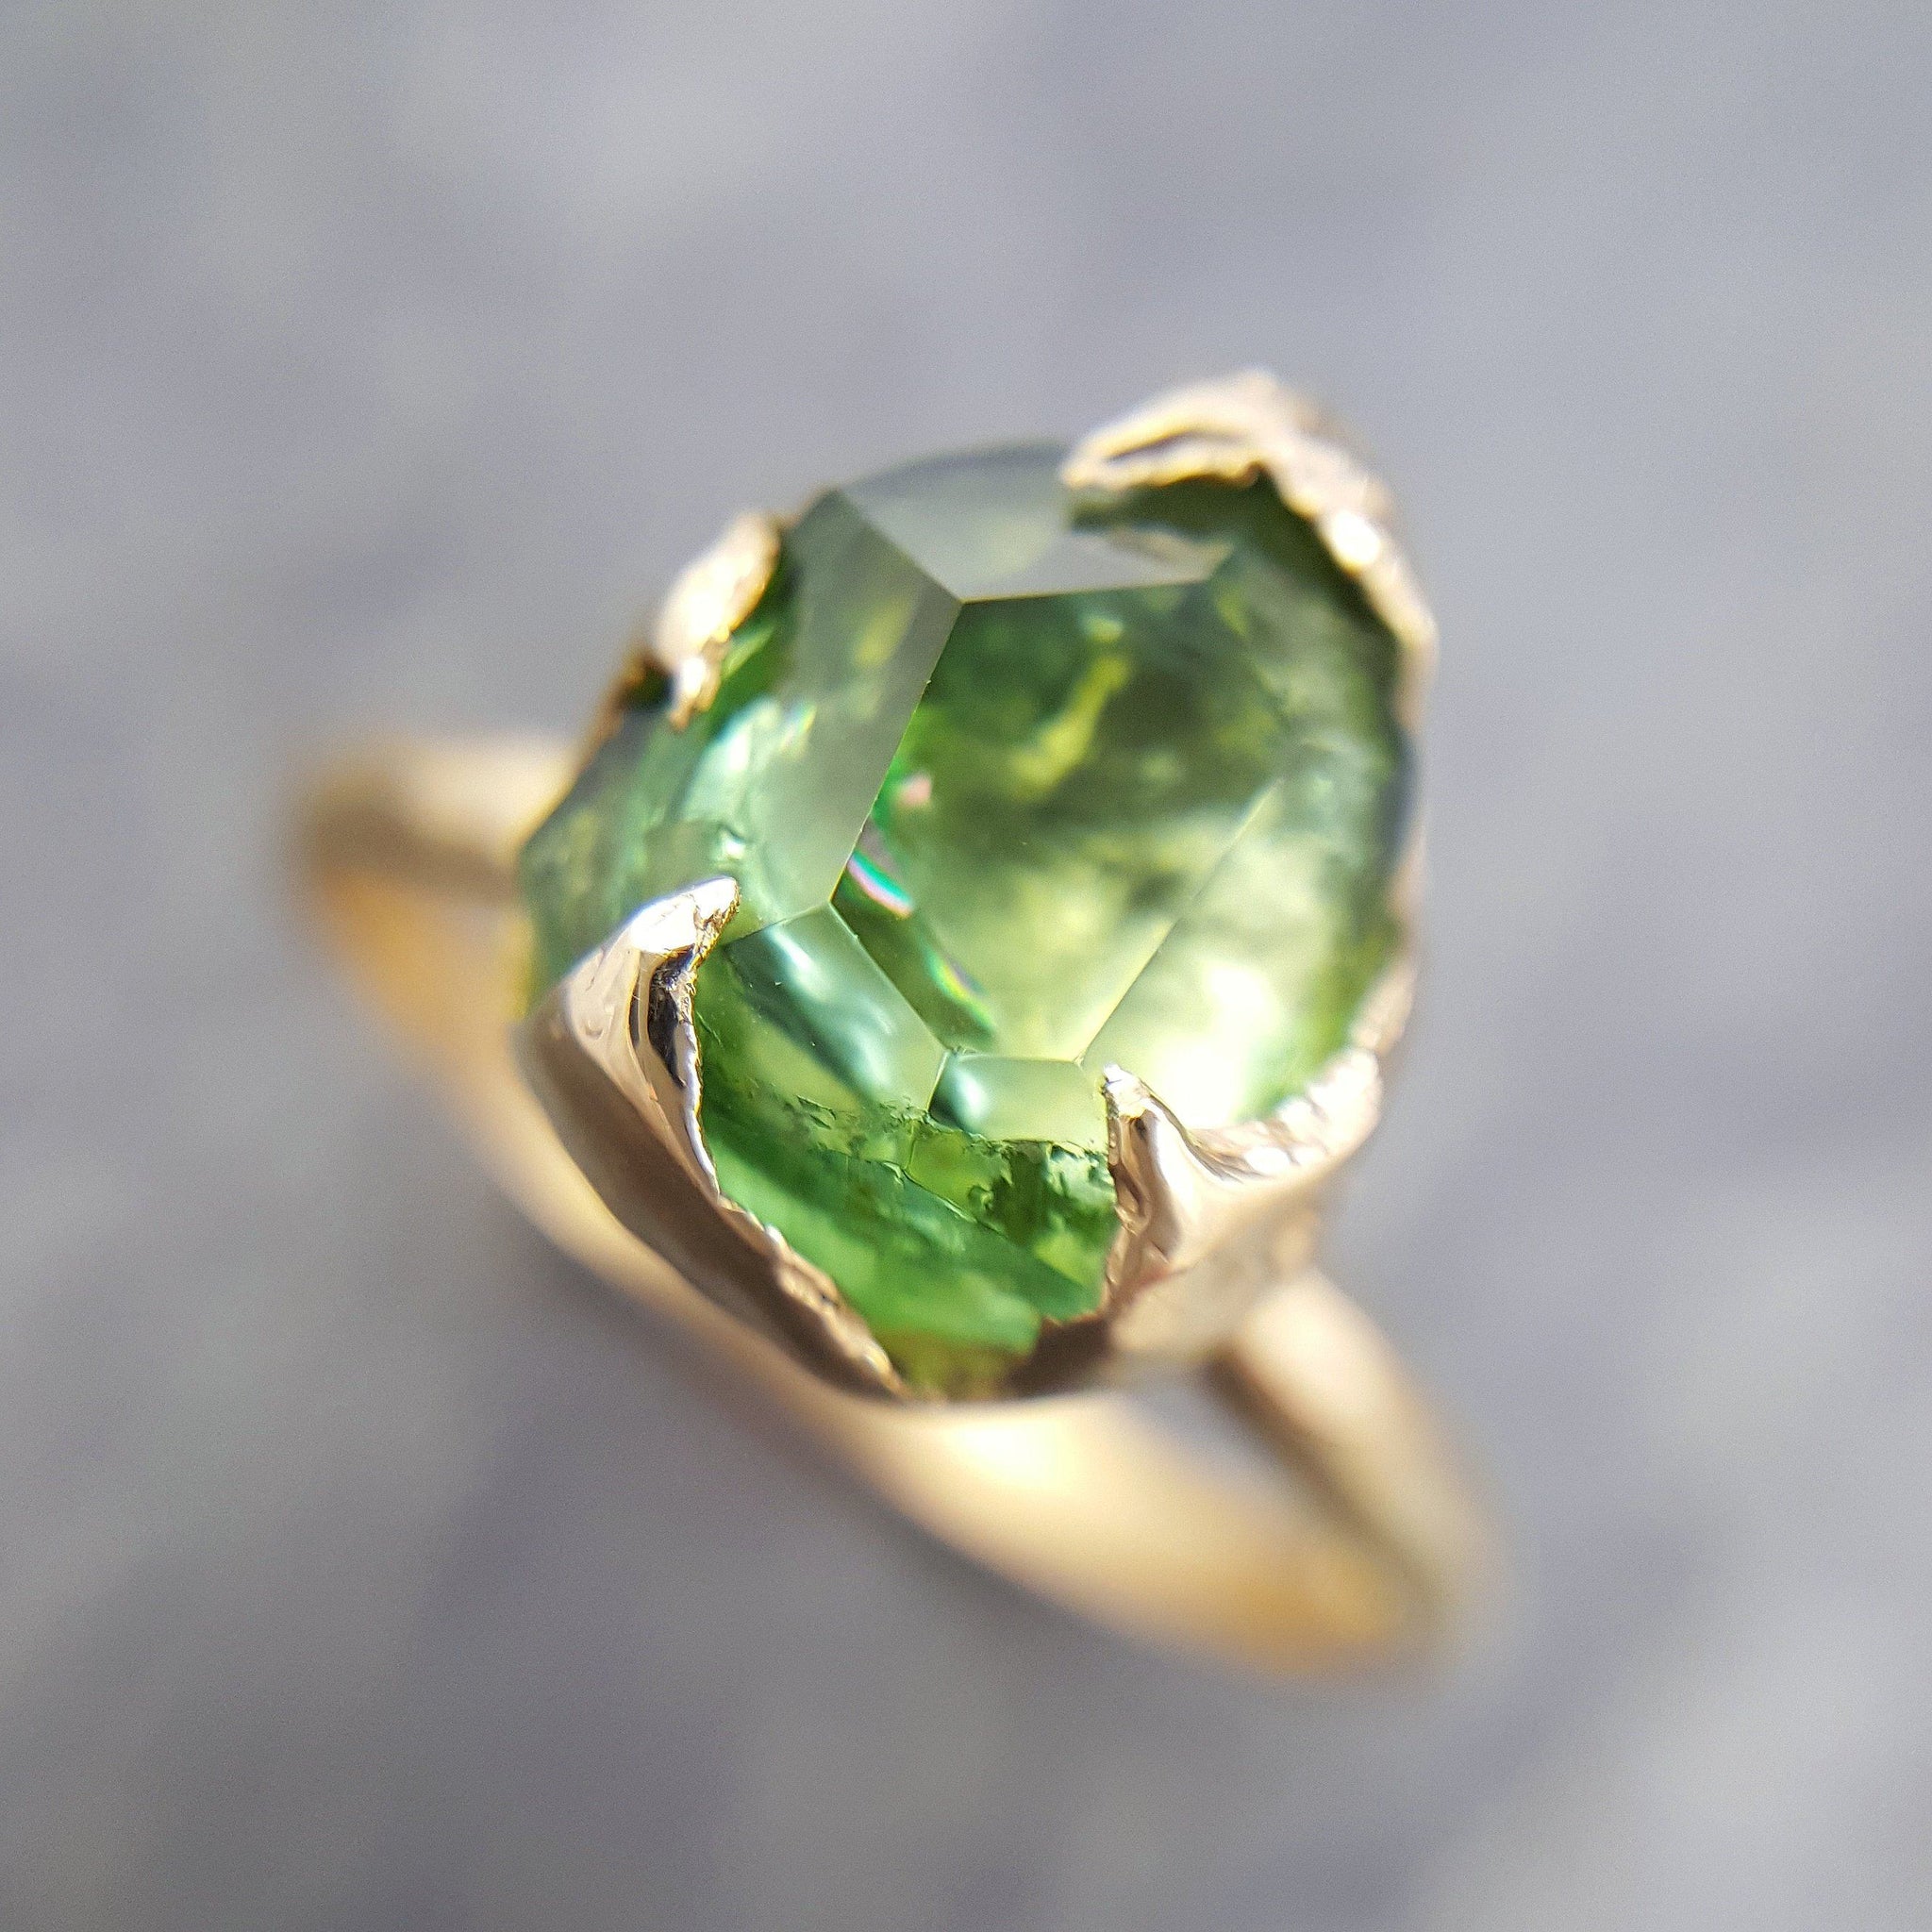 Partially faceted Solitaire Green Tourmaline 18k Gold Engagement Ring One Of a Kind Gemstone Ring byAngeline 1036 - by Angeline